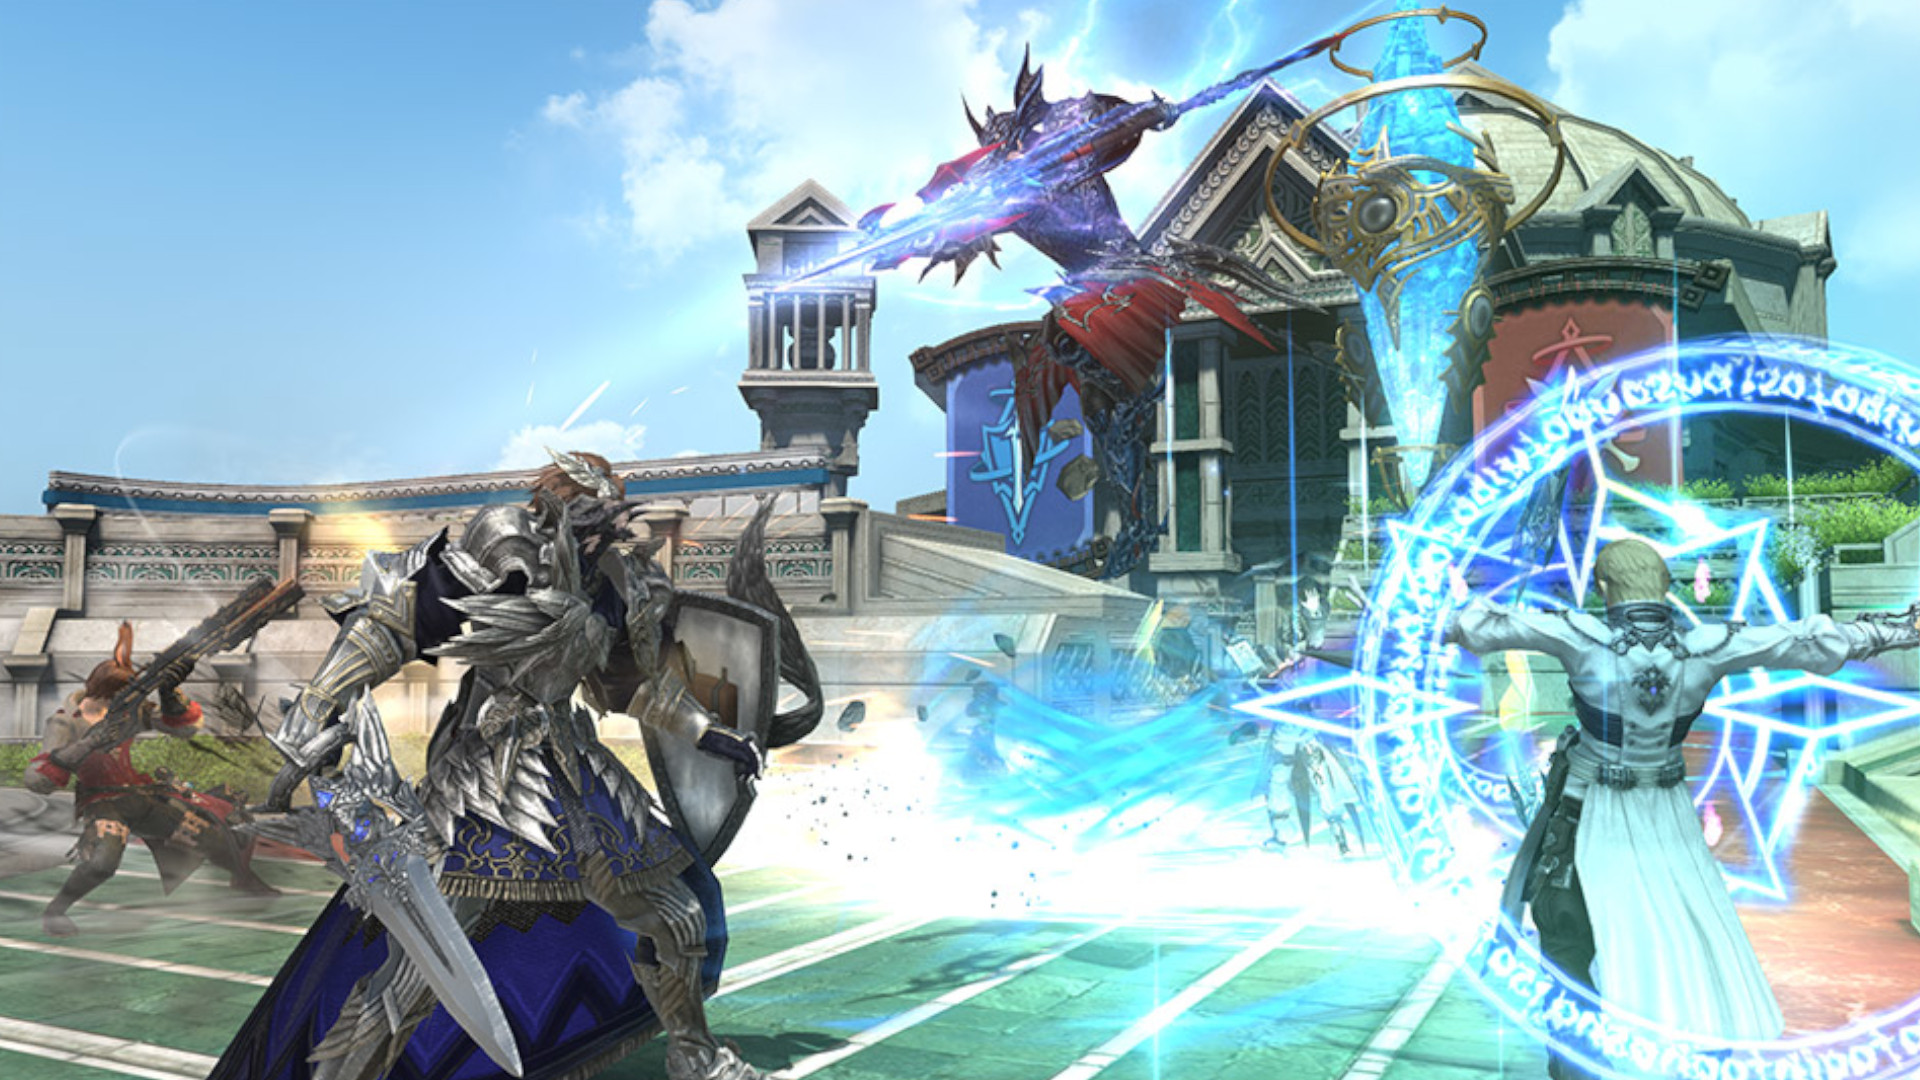 Setting off fireworks in FFXIV PvP can get players banned